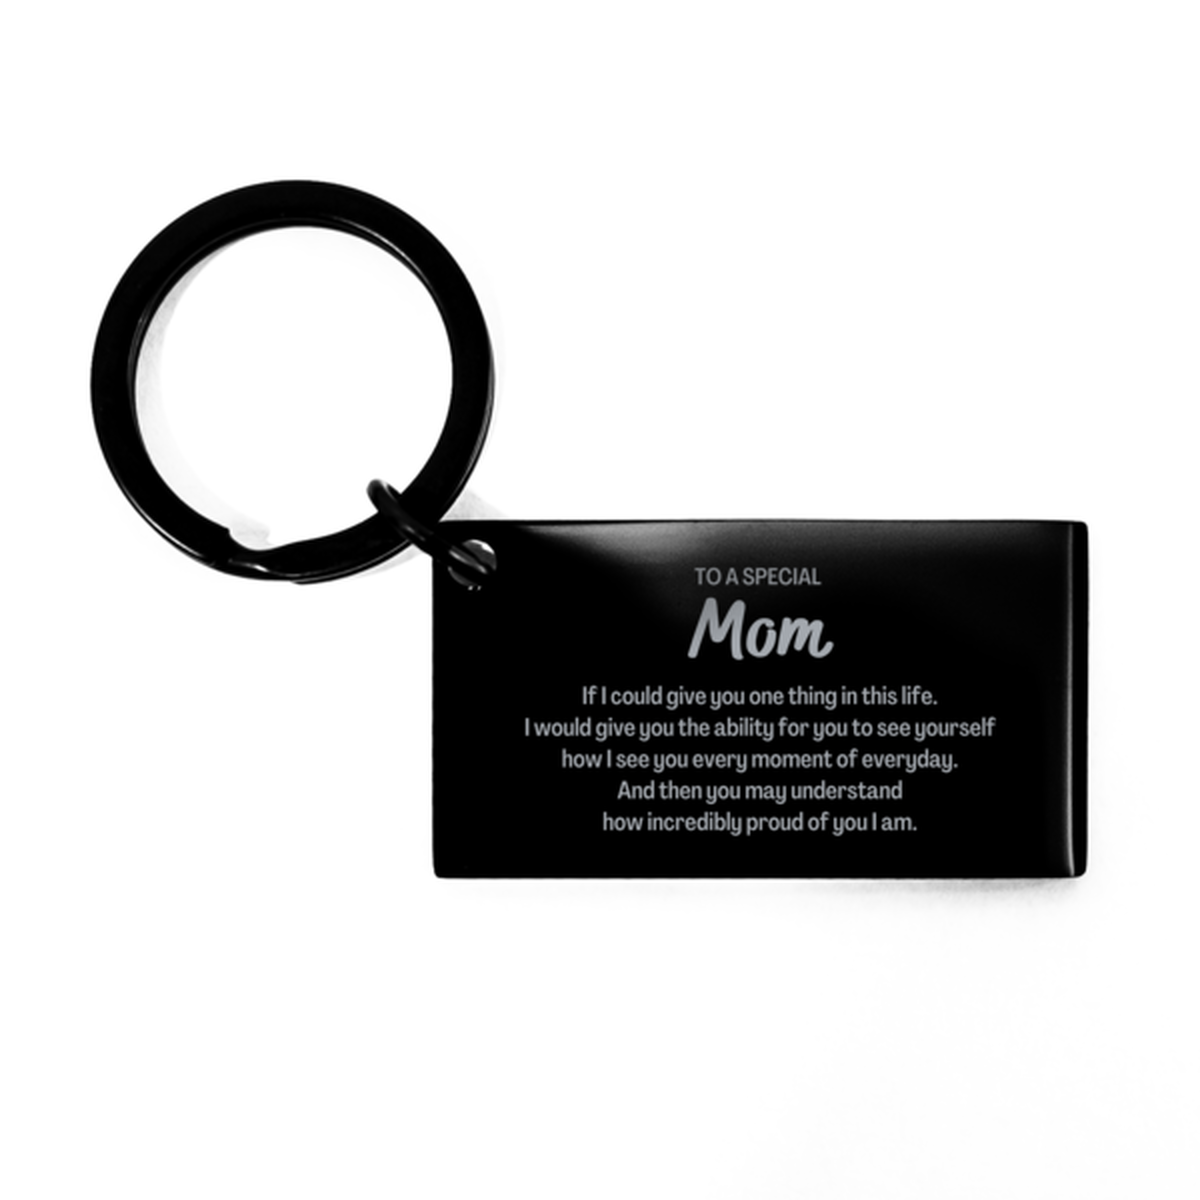 To My Mom Keychain, Gifts For Mom Engraved, Inspirational Gifts for Christmas Birthday, Epic Gifts for Mom To A Special Mom how incredibly proud of you I am